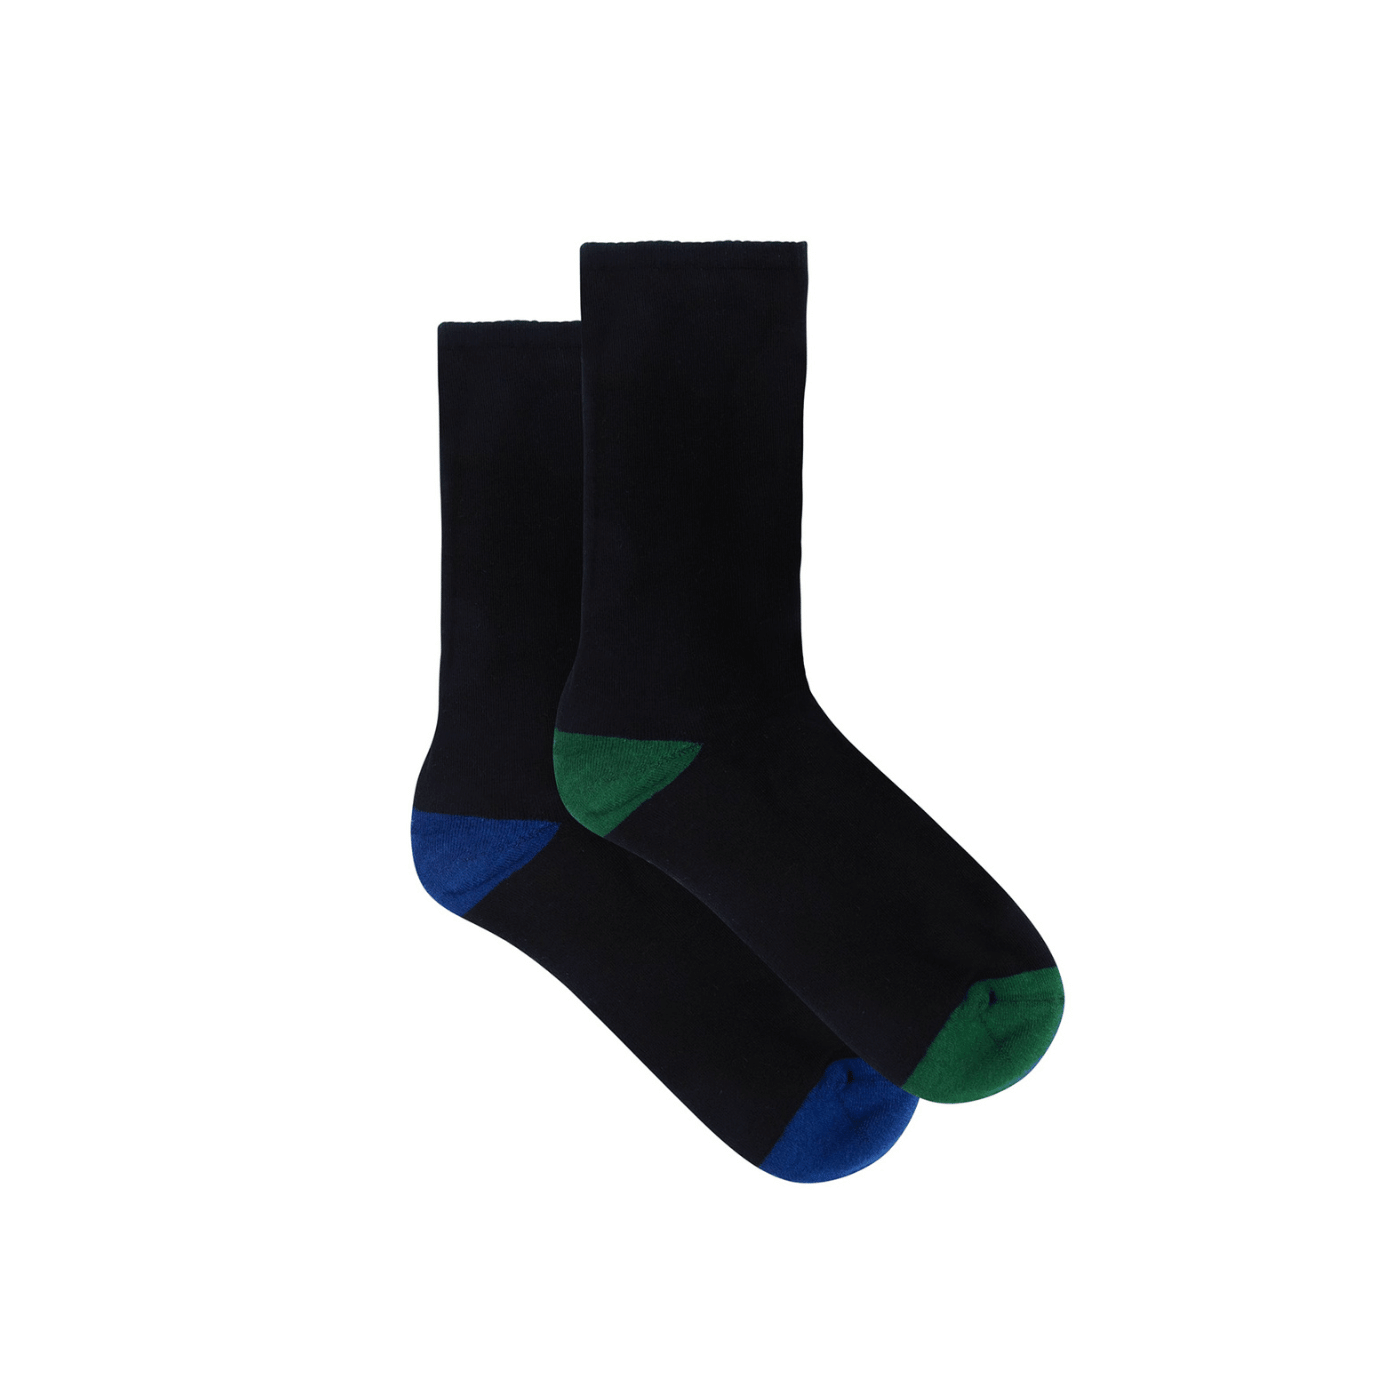 All Day Socks Men's Cushion Crew with Colour Heel and Toe 2pk